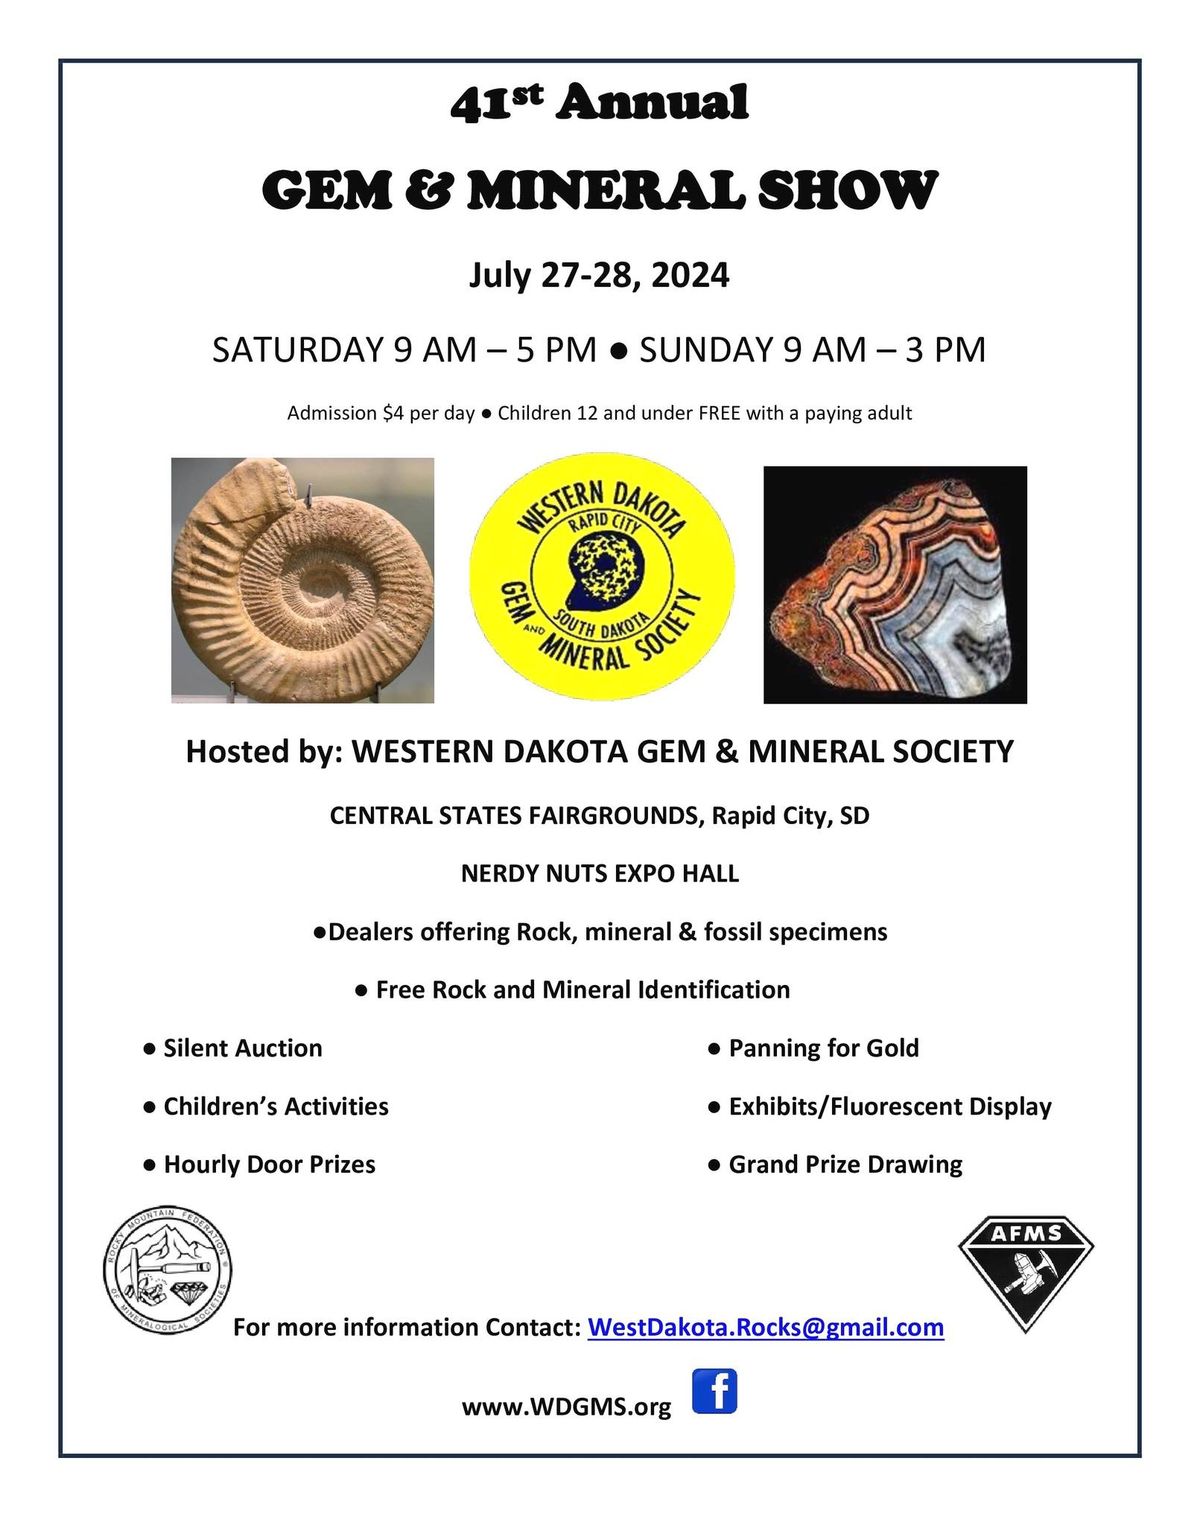 41st Annual Gem & Mineral Show